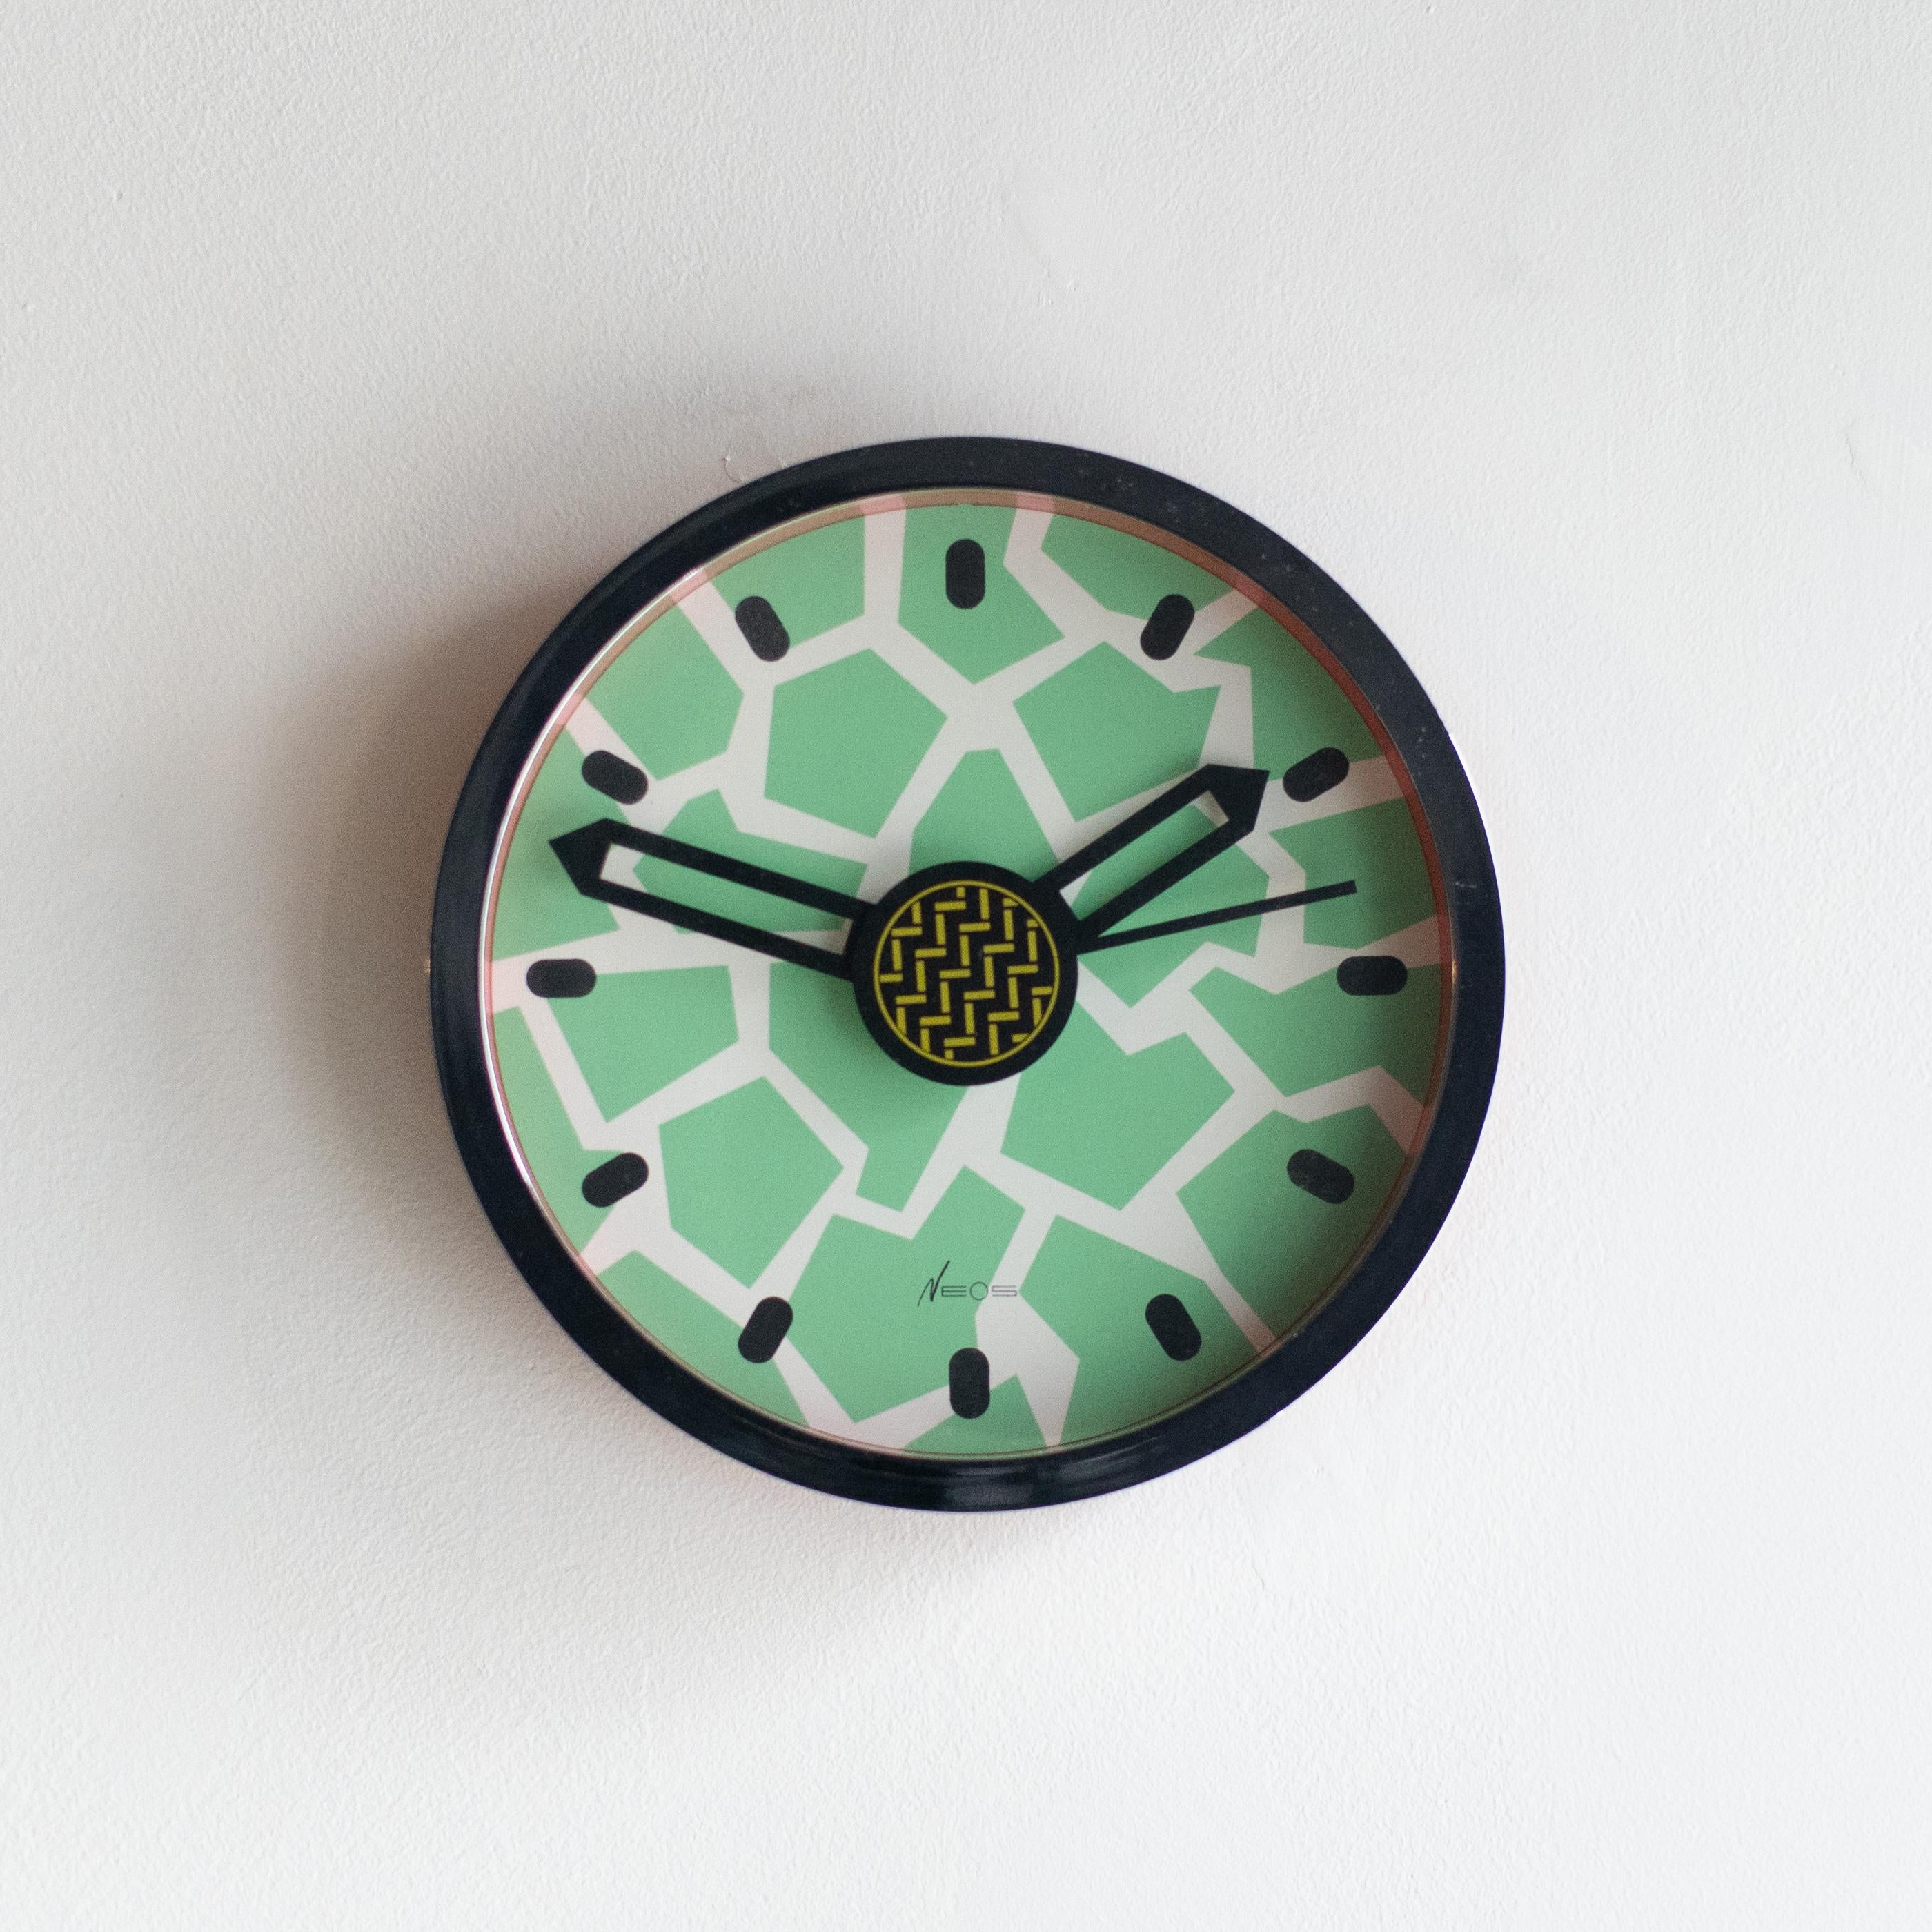 Neos clock designed by George Sowden and Nathalie du Pasquier in the 80s. Neos is the brand run by Lorenz clock company in Italy. They were designed a lot of clock and watch for this company in the 80s. 
Clocks are all Memphis style.

Working